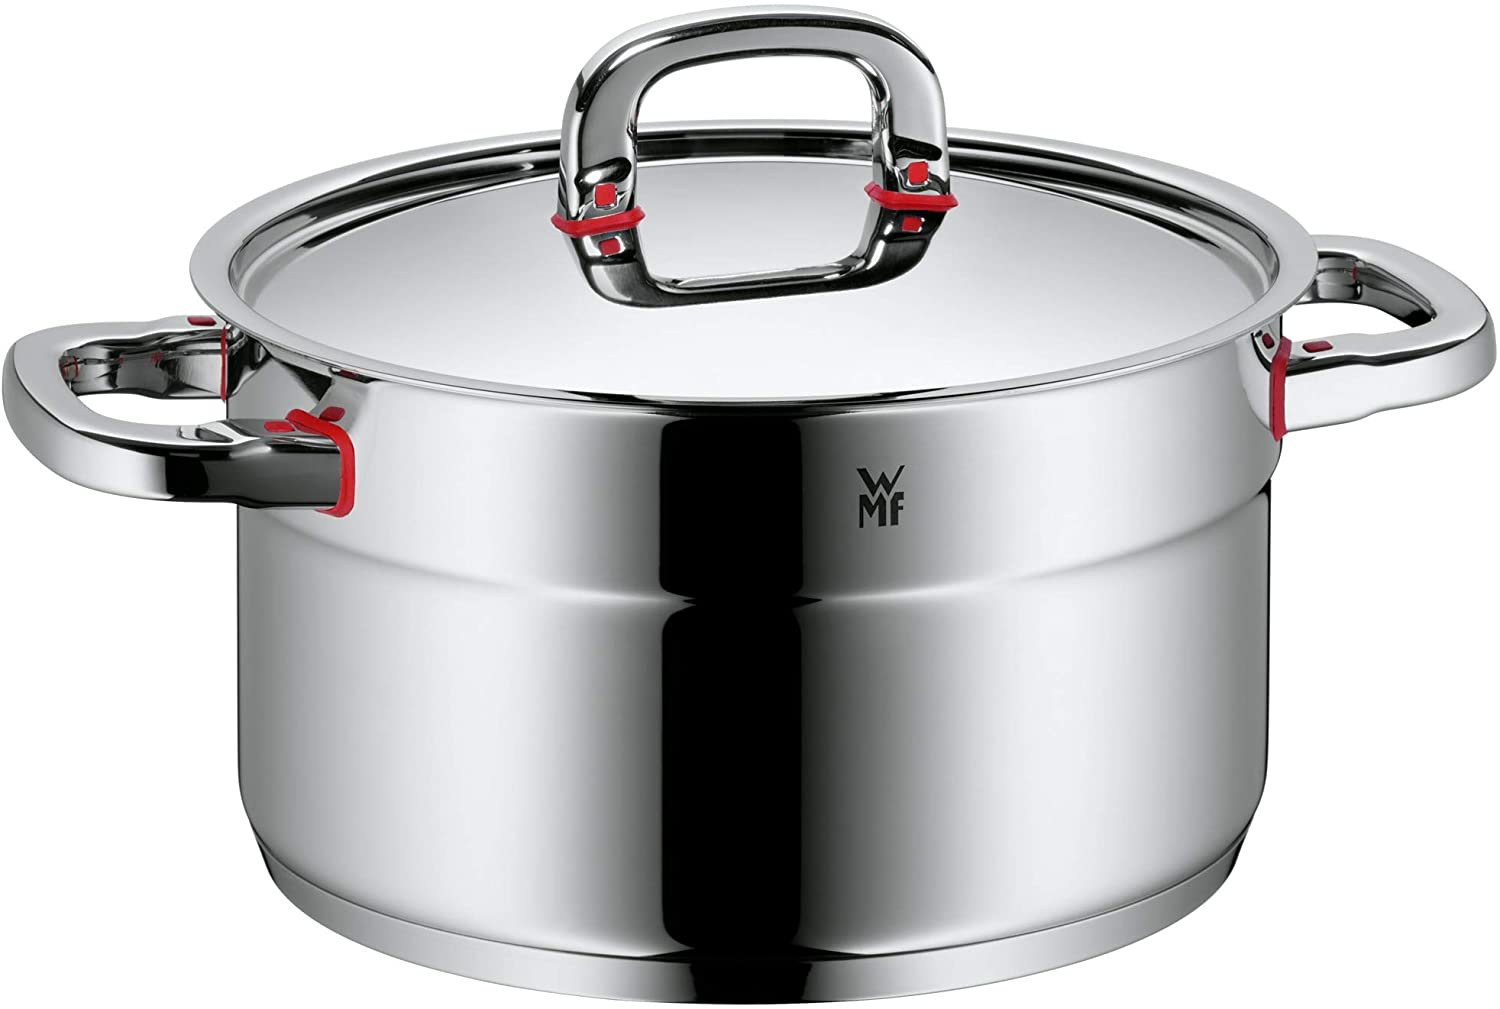 WMF cookware Ø 24 cm approx. 5,6l Premium One Inside scaling vapor hole Cool+ Technology metal lid Cromargan stainless steel brushed suitable for all stove tops including induction dishwasher-safe